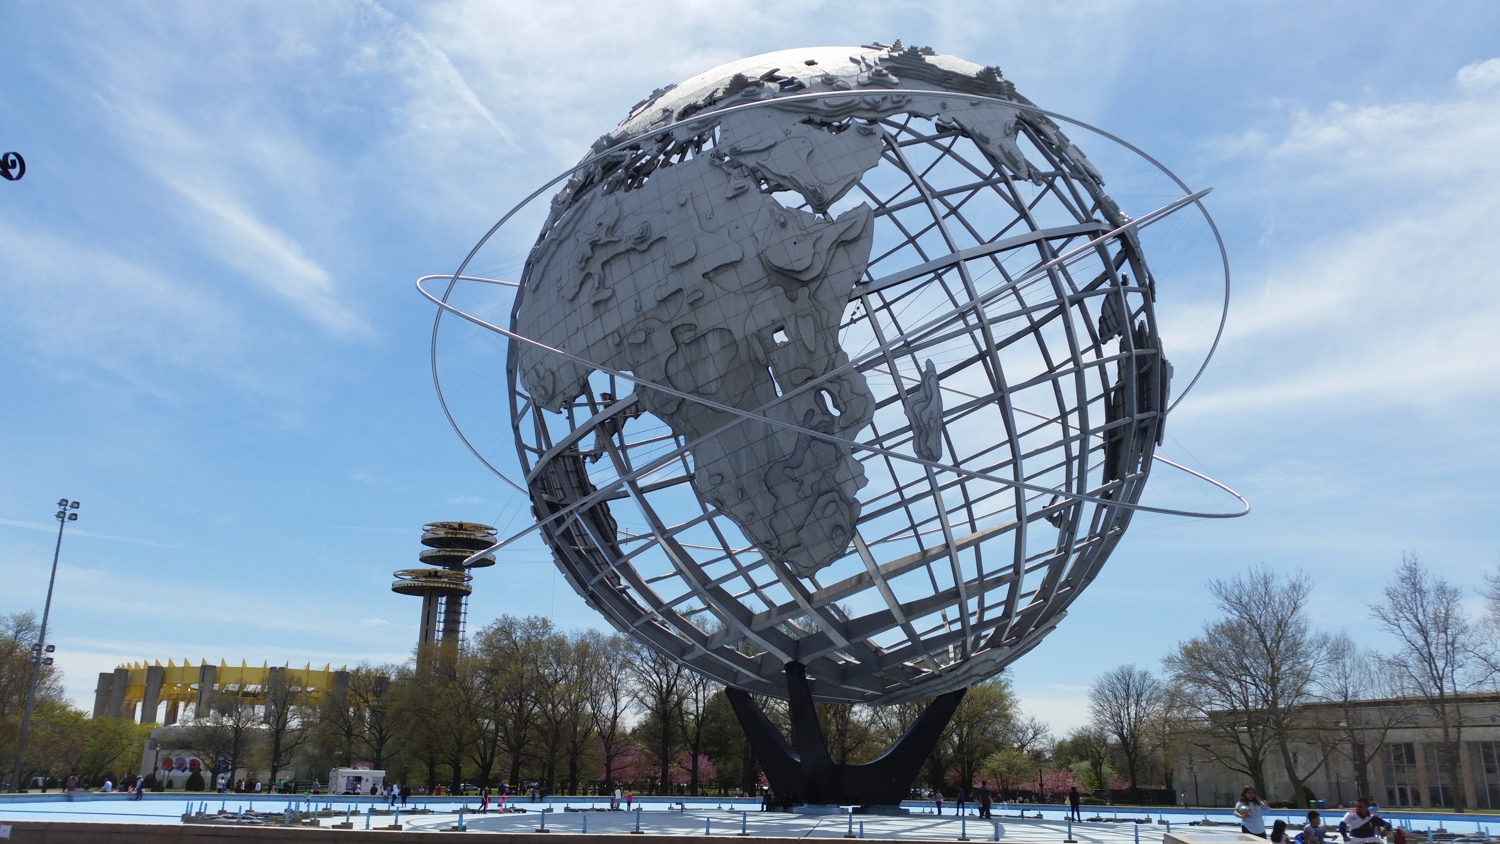 Parks in NYC - Flushing Meadows Corona Park